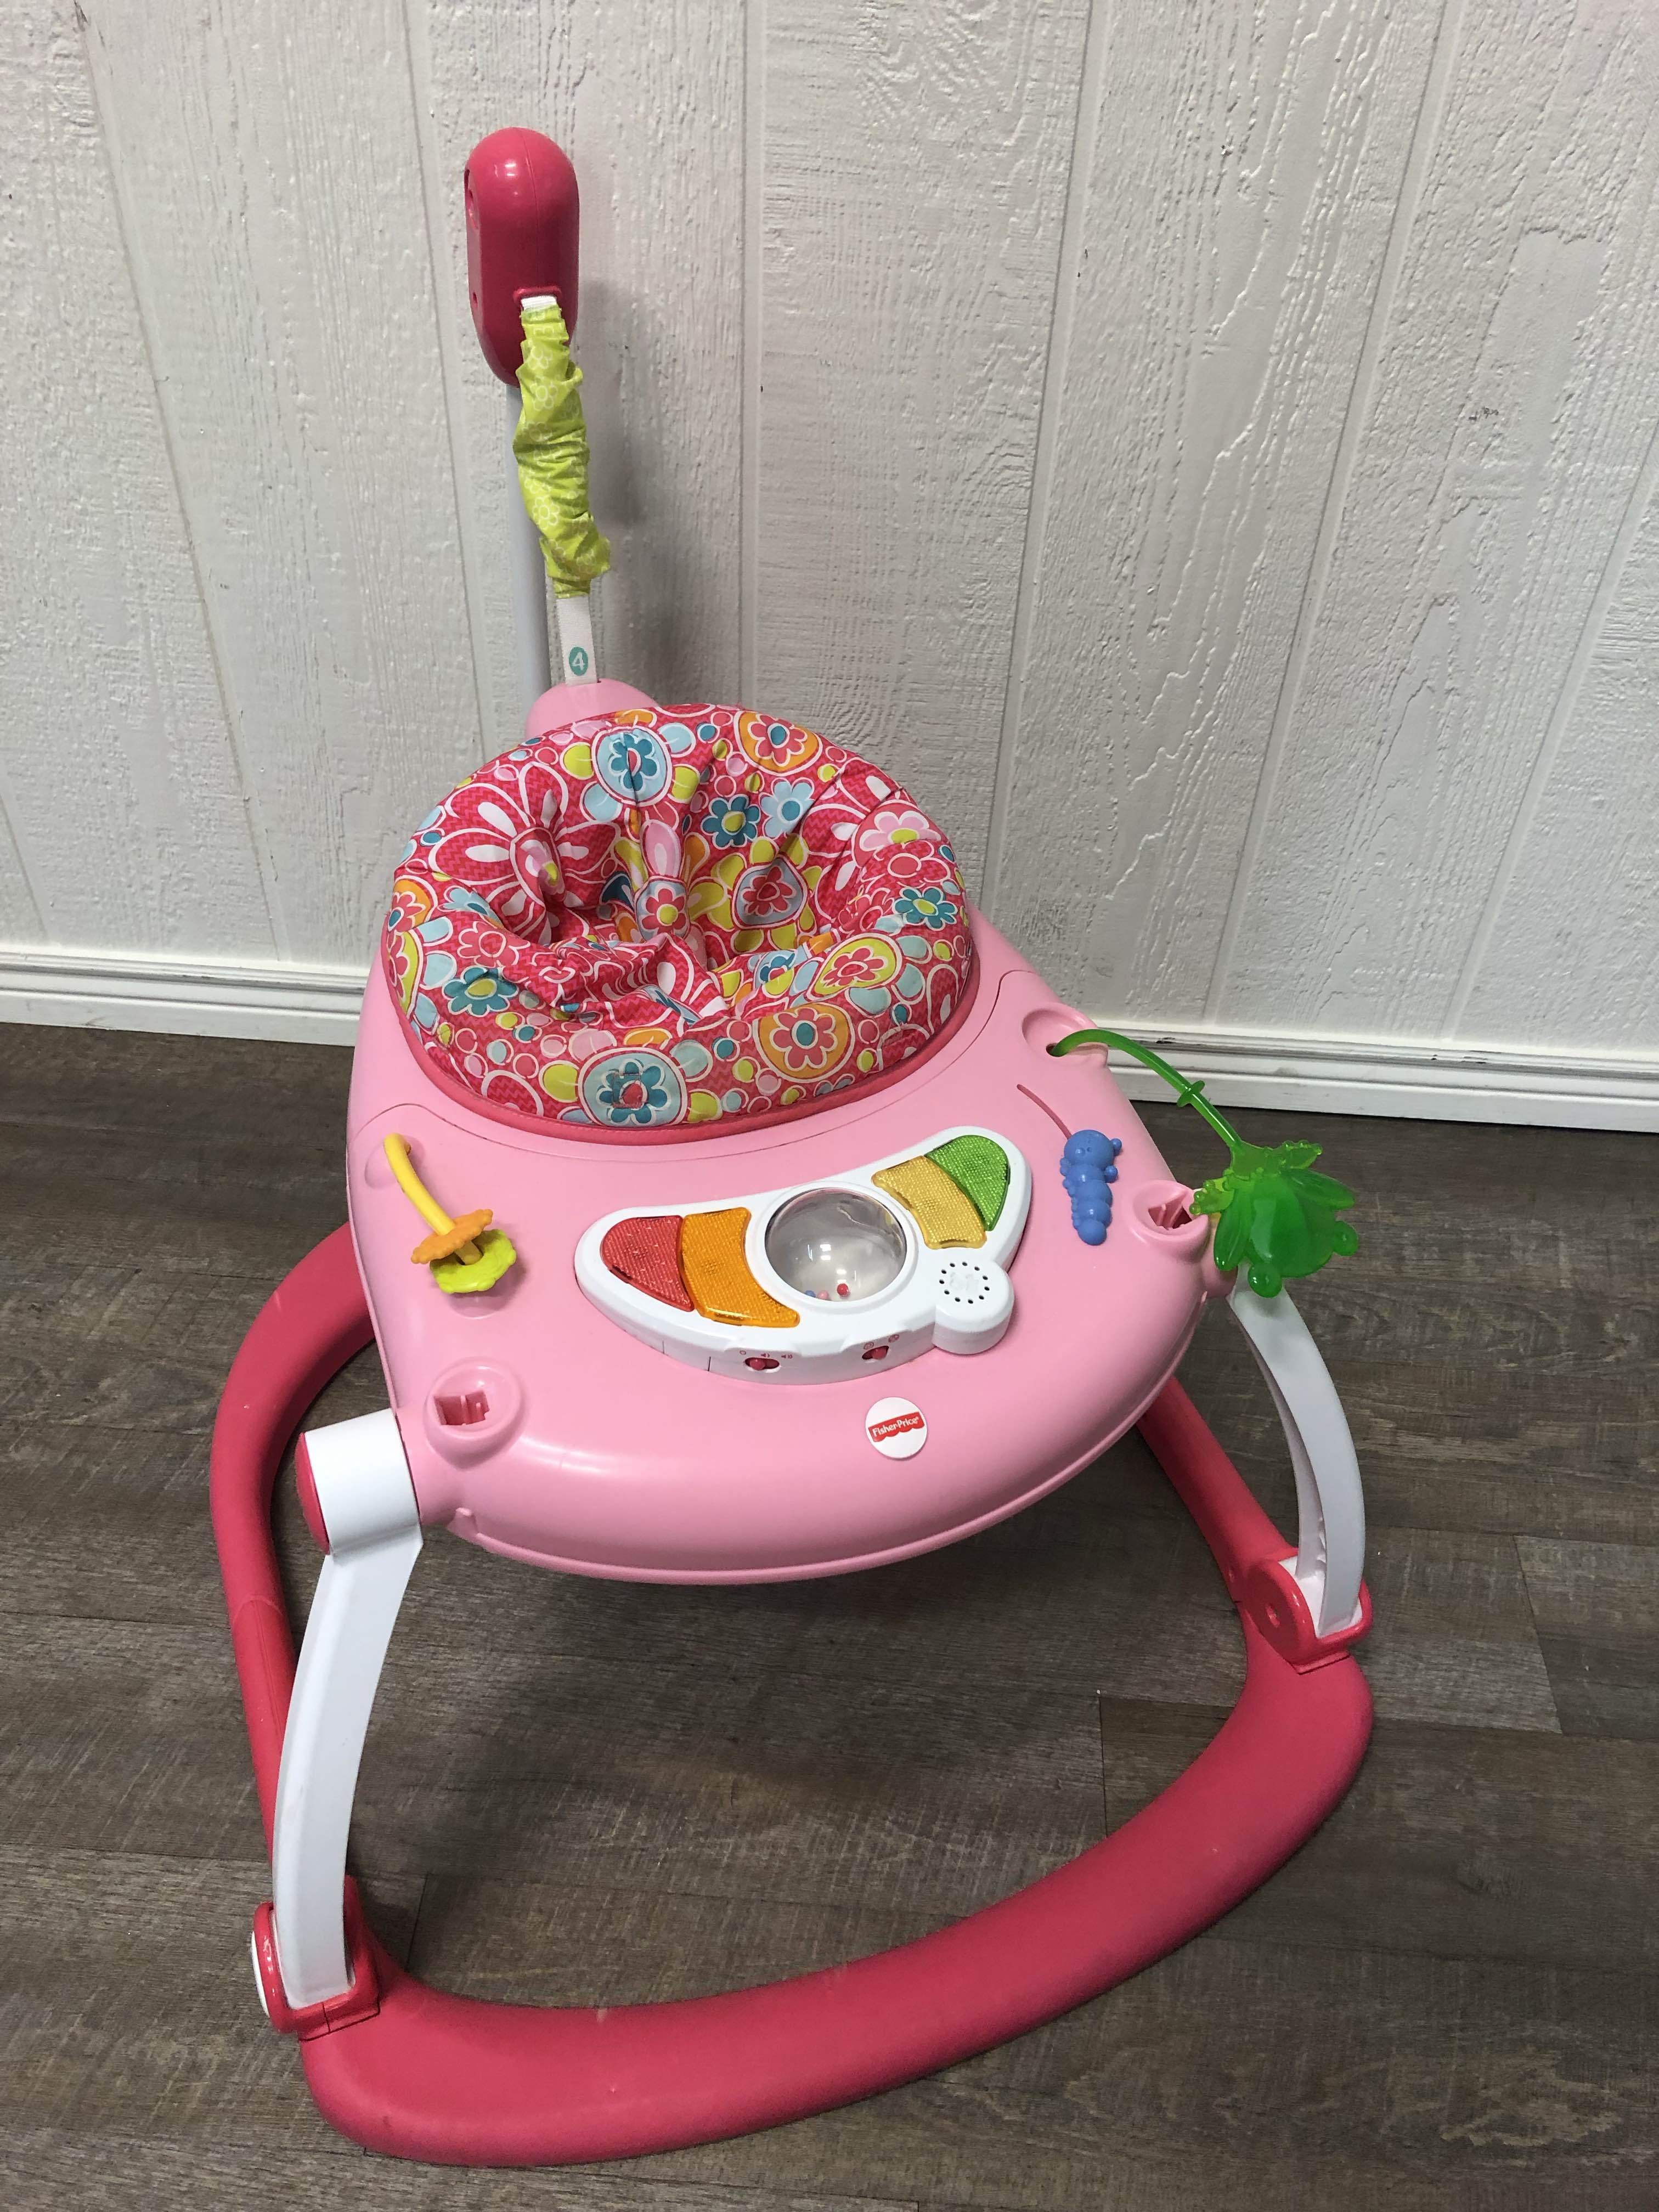 fisher price space saver jumperoo pink